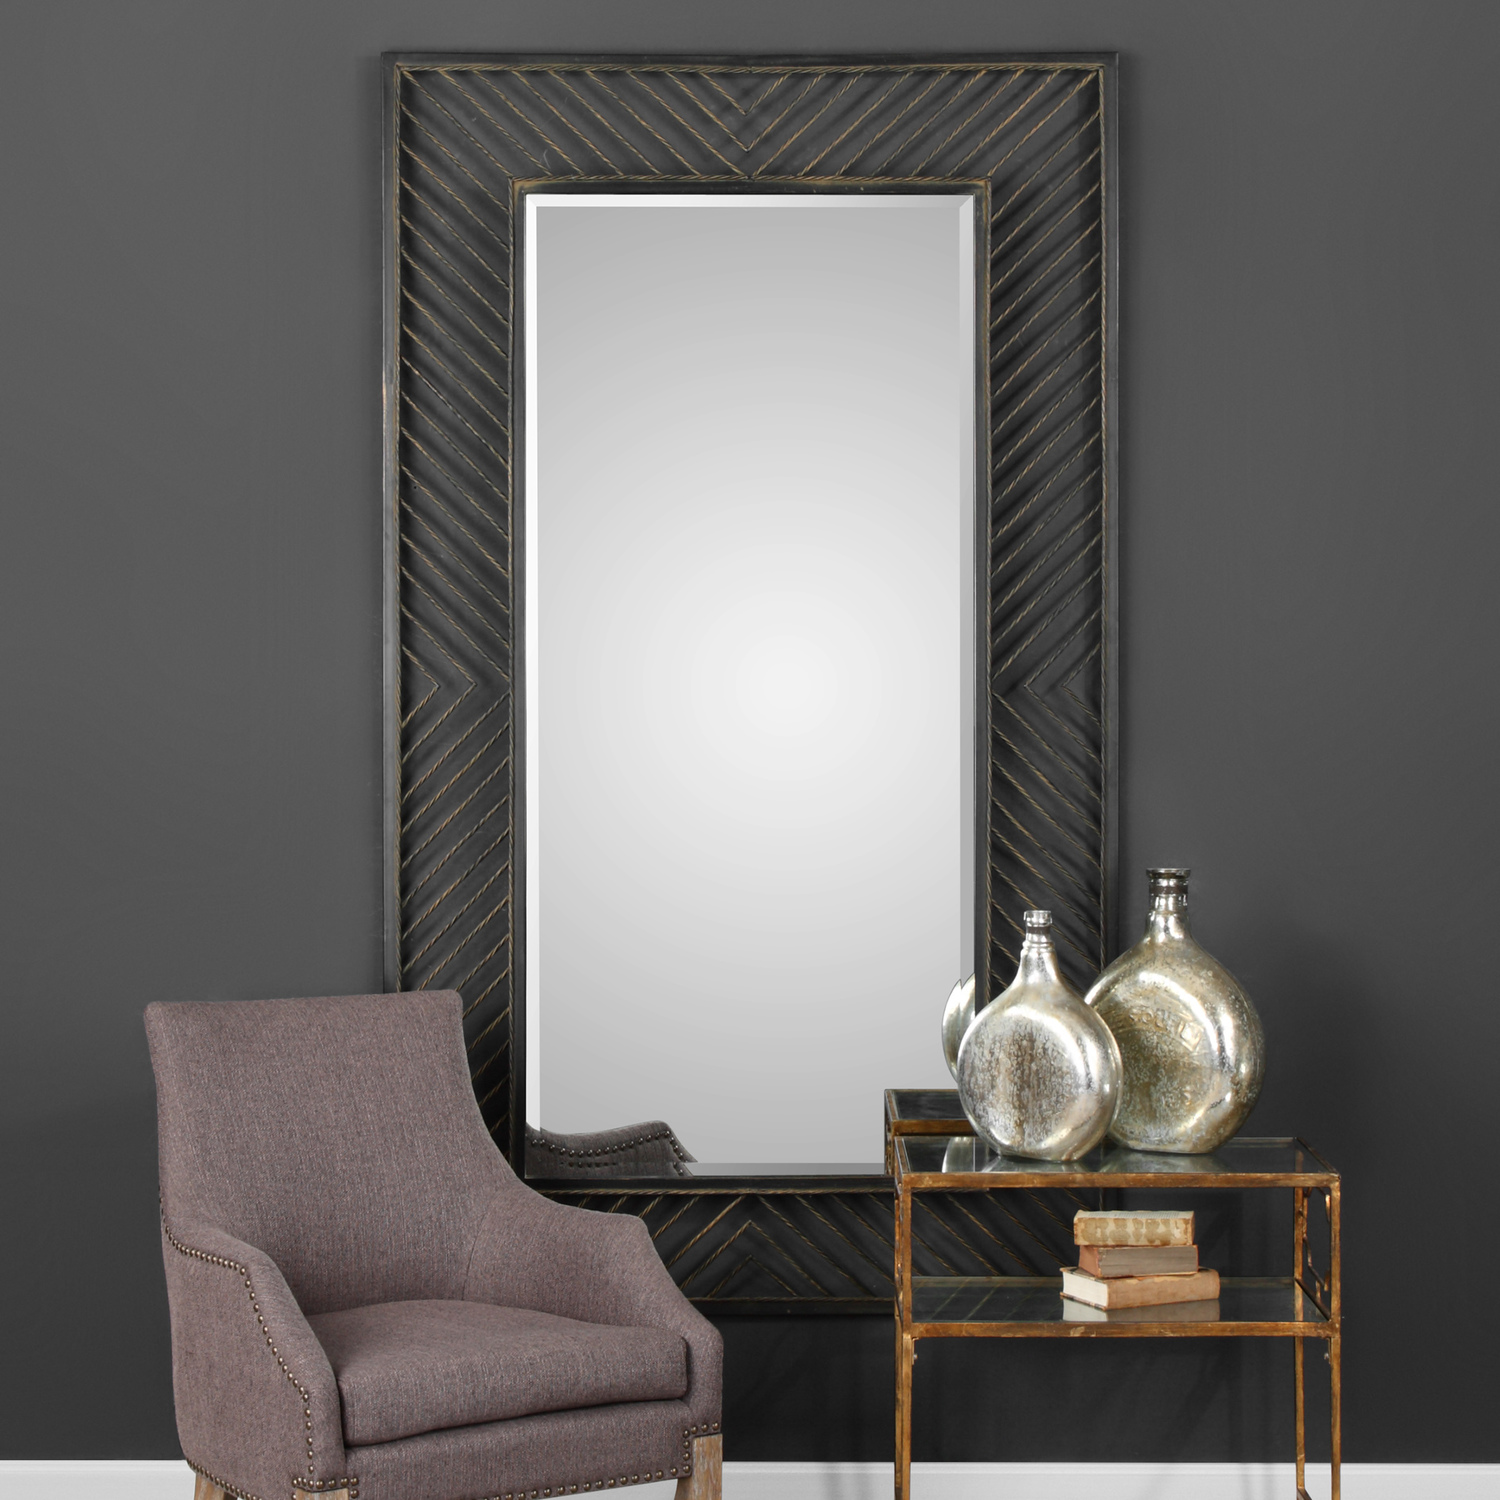 floor french mirror Uttermost Chevron Mirror Twisted Iron Rods Form A Subtle Chevron Pattern, Hand Finished In A Lightly Distressed Rustic Bronze Accented With A Rust Glaze And Metallic Gold Undertones.